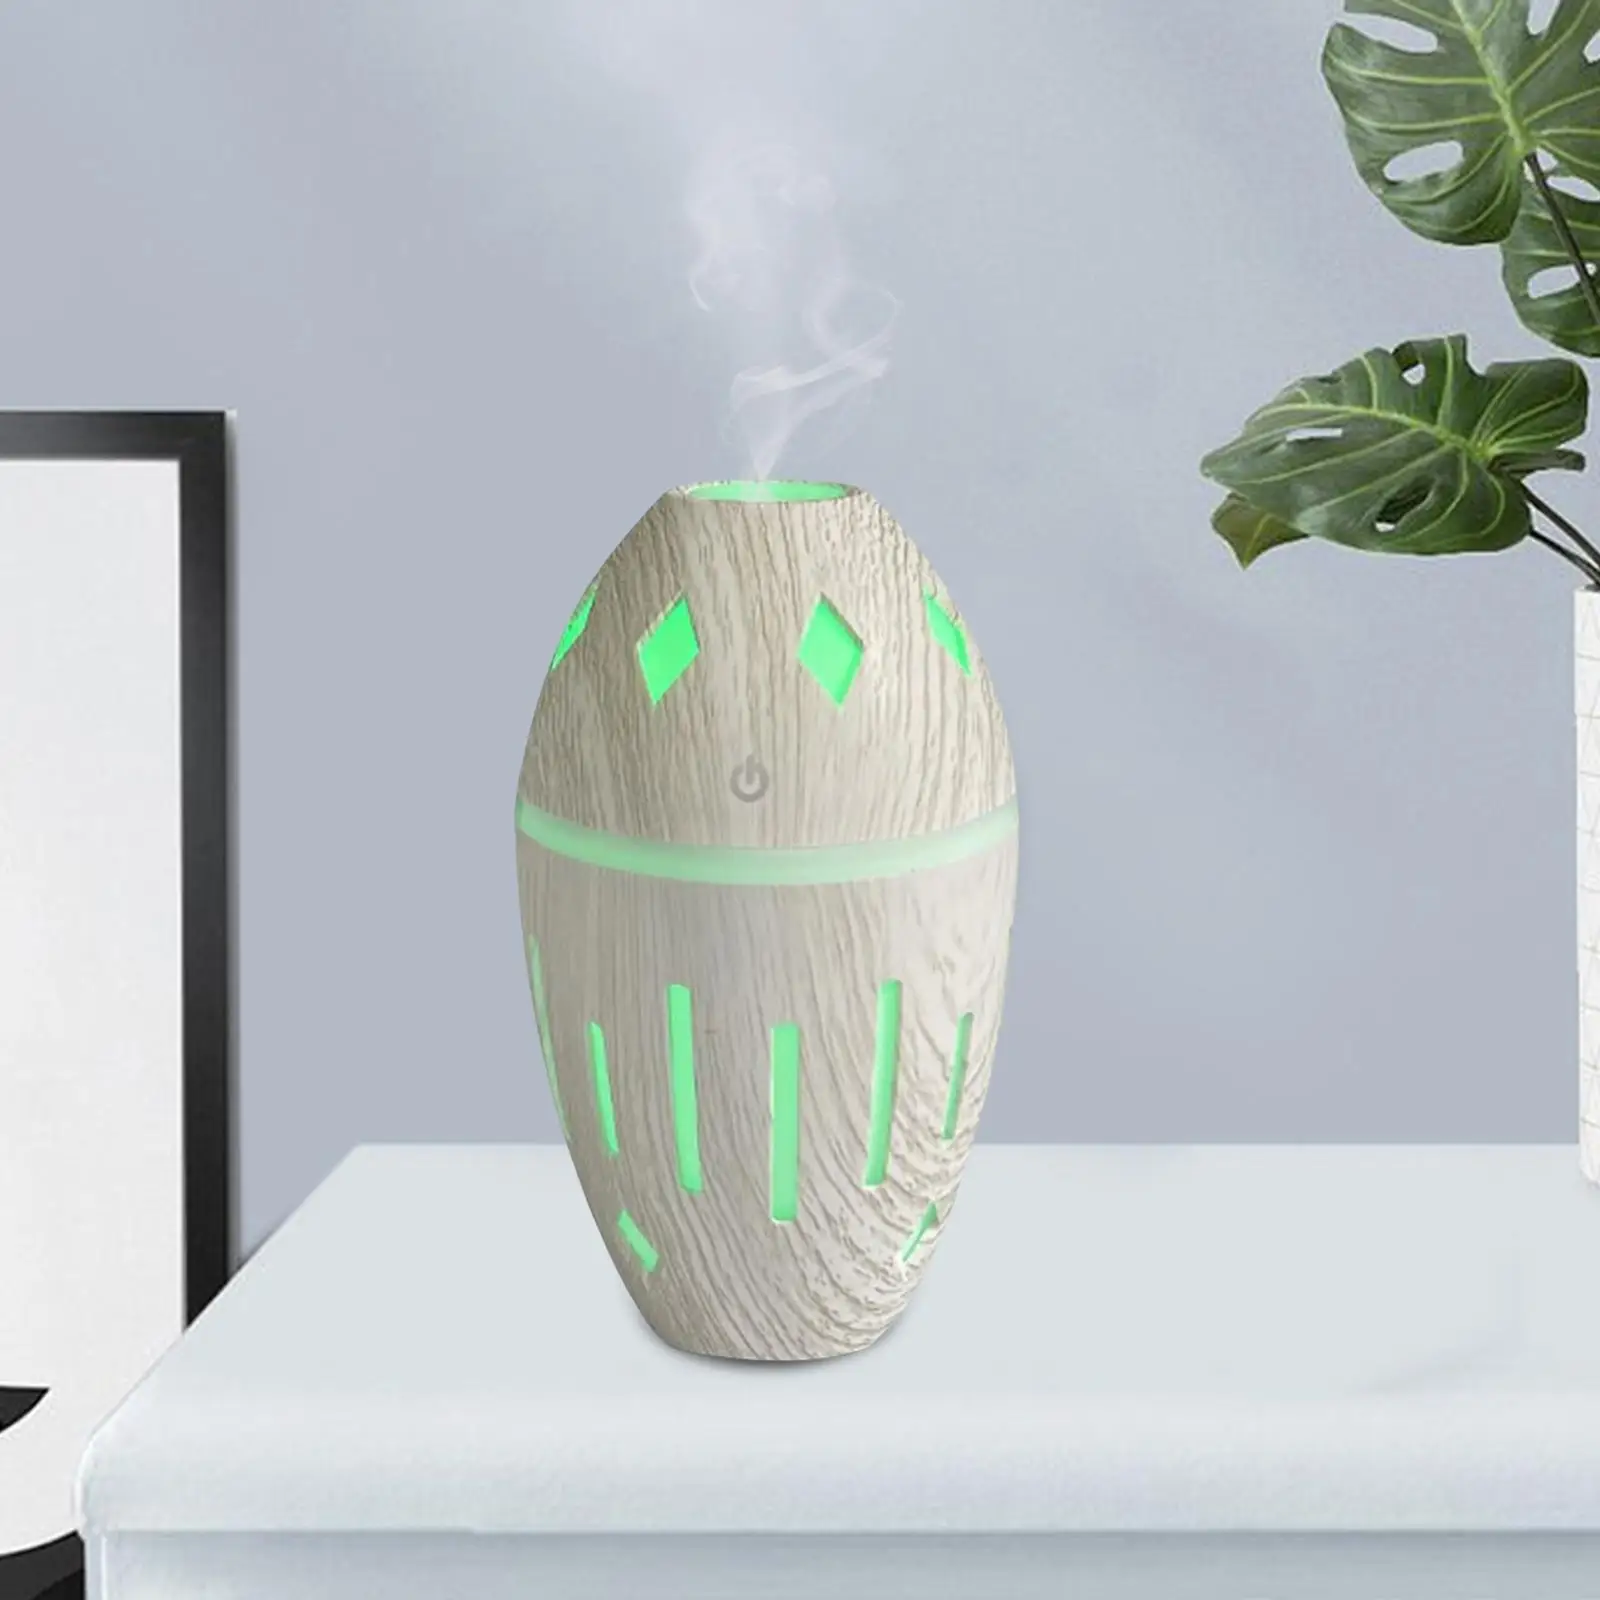 Cool Mist Humidifier Night Light Personal Wood Grain 300ml Air Humidifier Diffuser for Indoor Dorm Car Office Bedroom